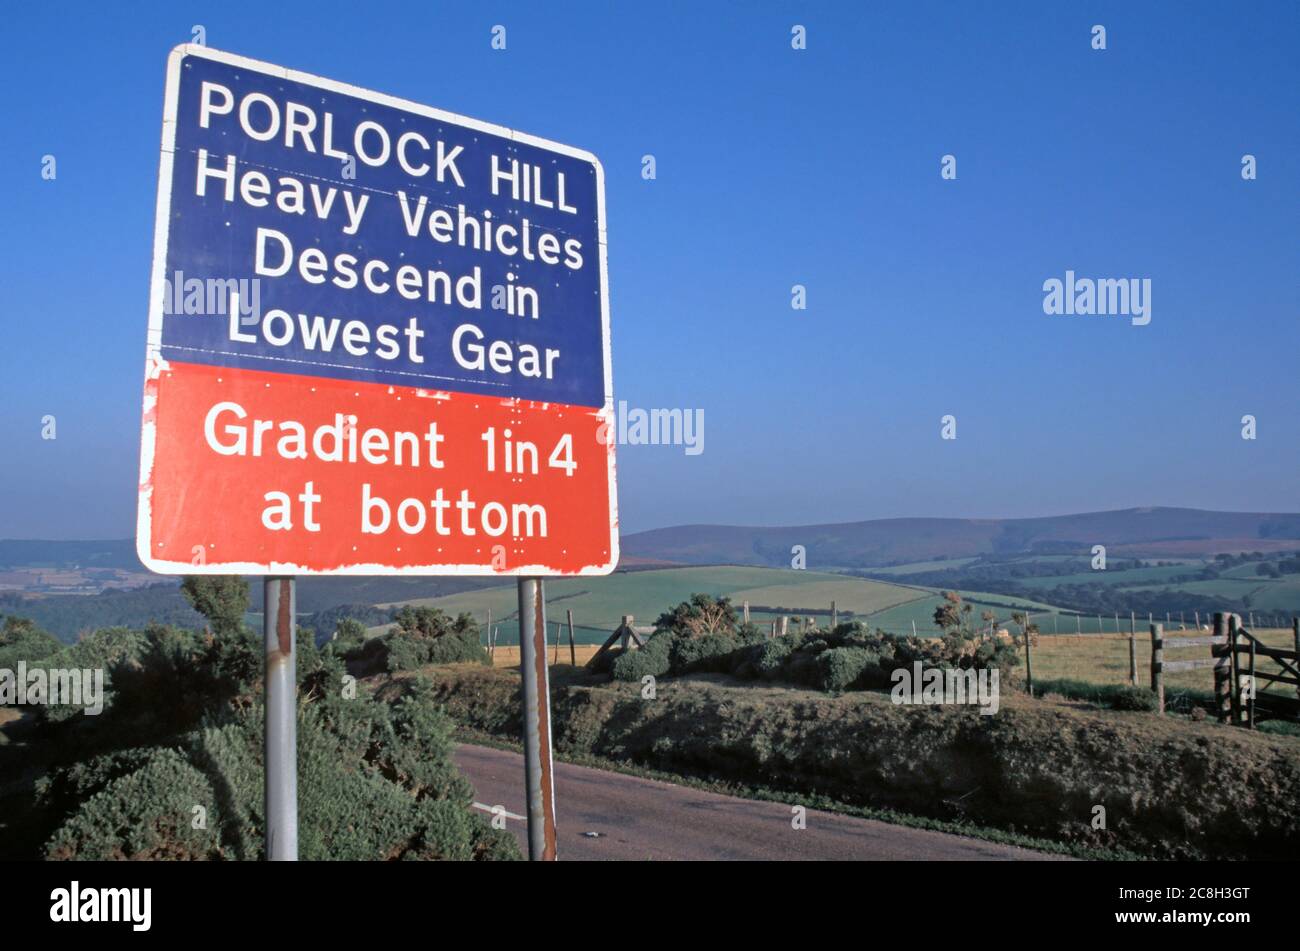 Road traffic warning sign at Porlock Hill on A39 steep gradient instructing use of low gear hilly farmland countryside landscape Somerset England UK Stock Photo